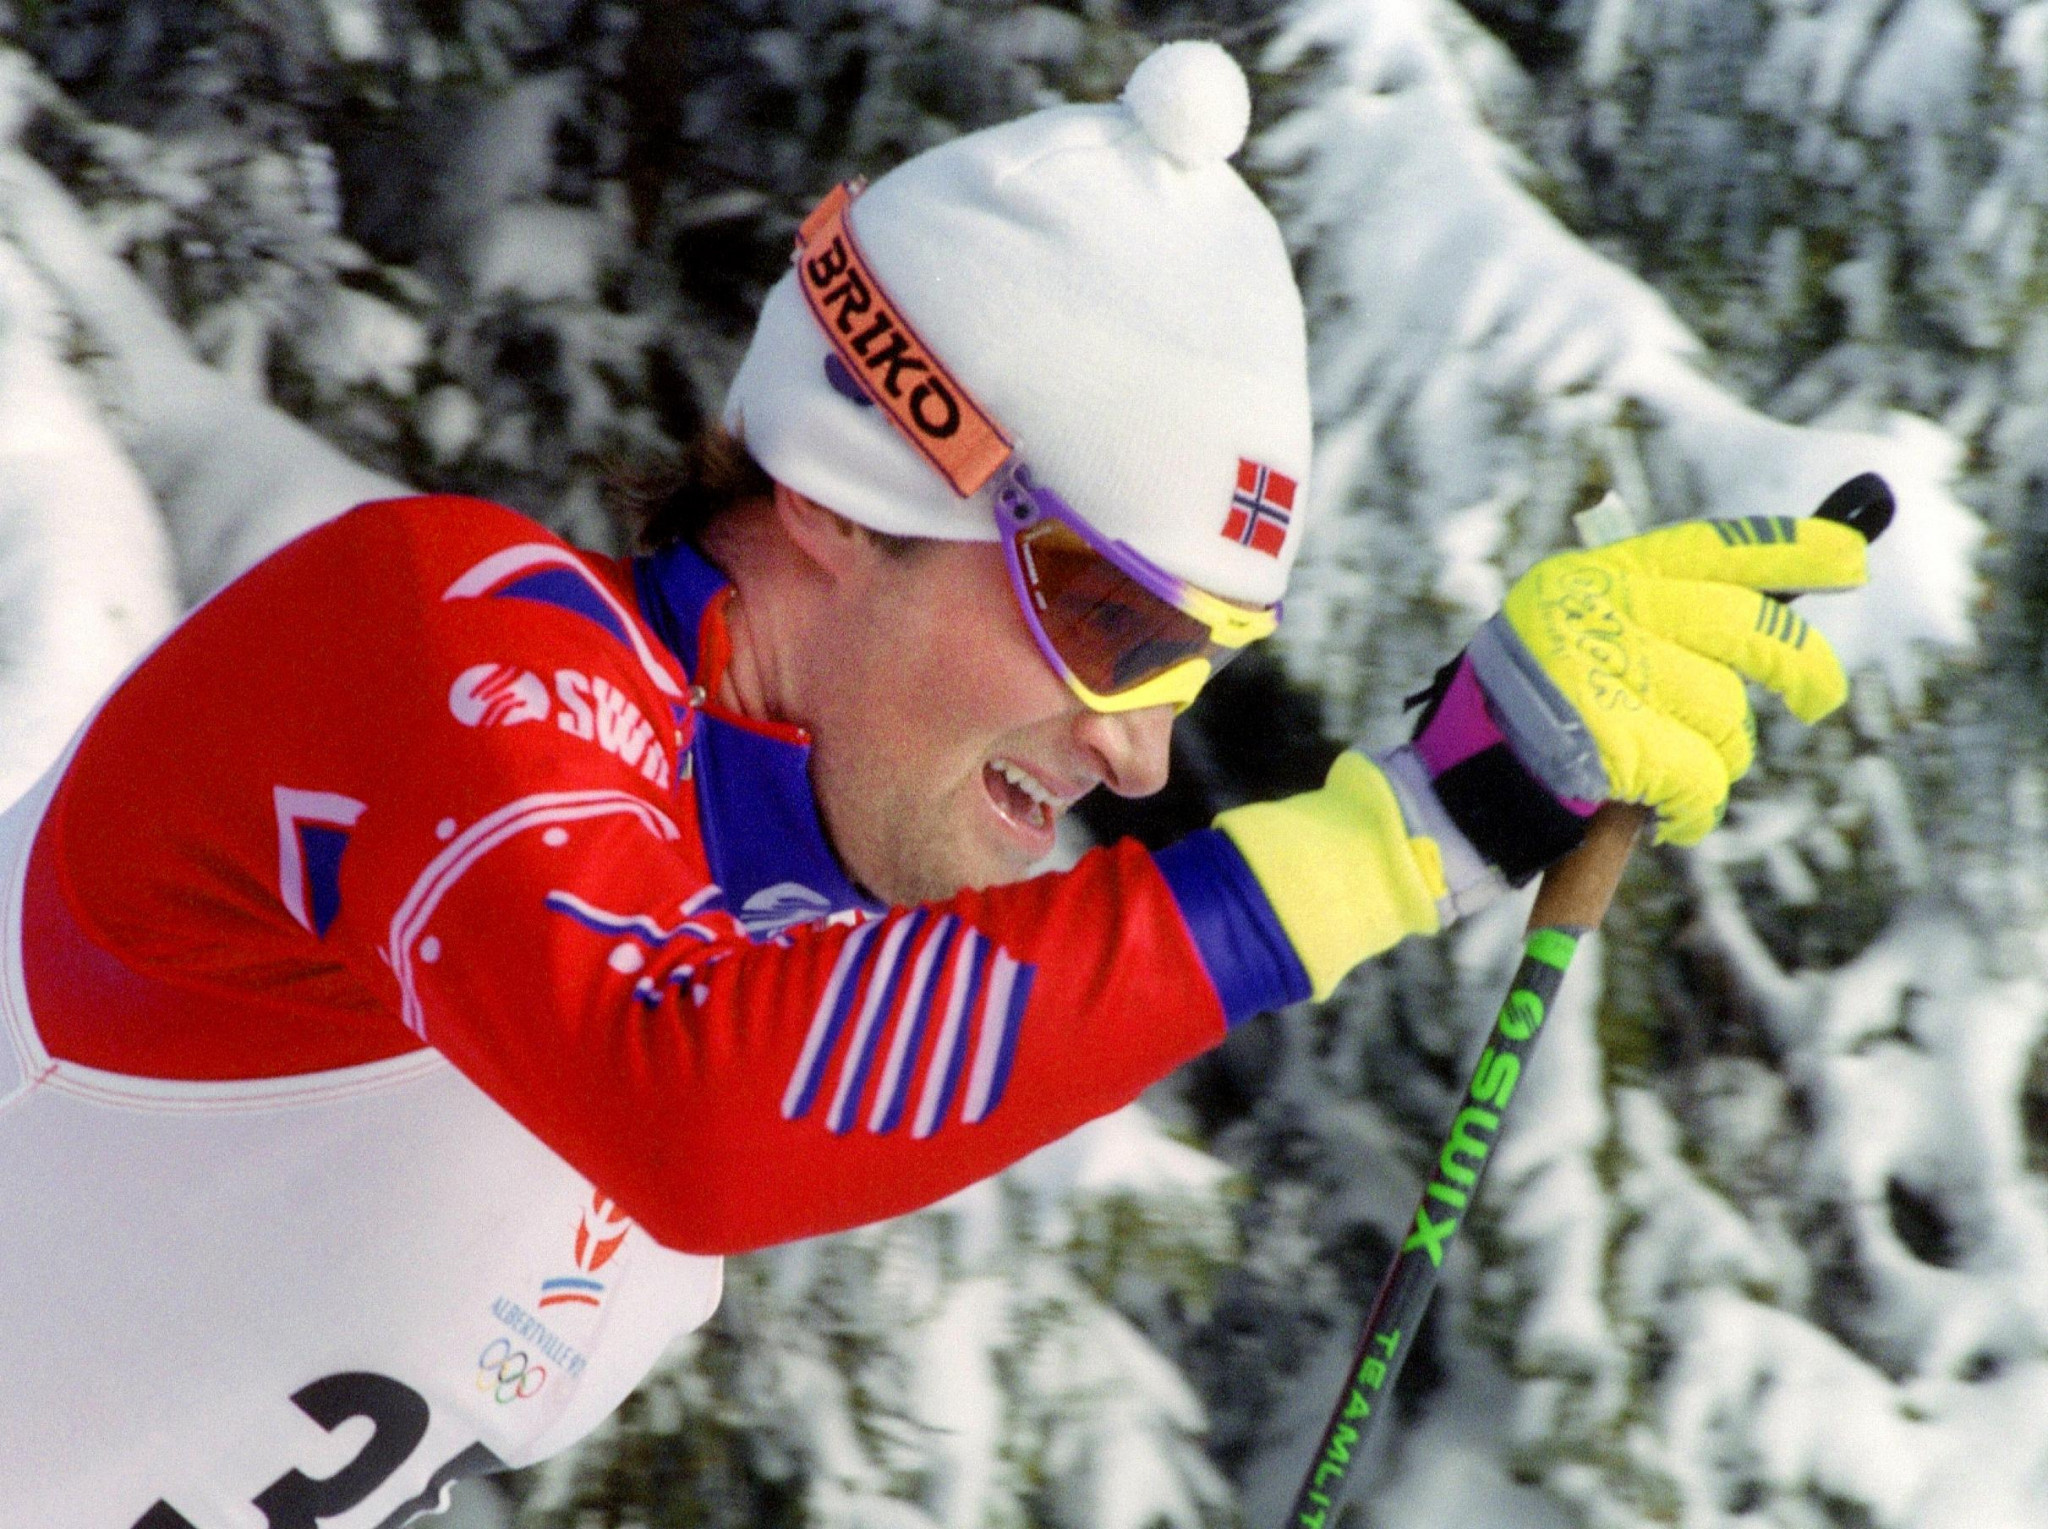 Norway's Vegard Ulvang, chair of the FIS Cross-Country Executive Board, acknowleged that his 